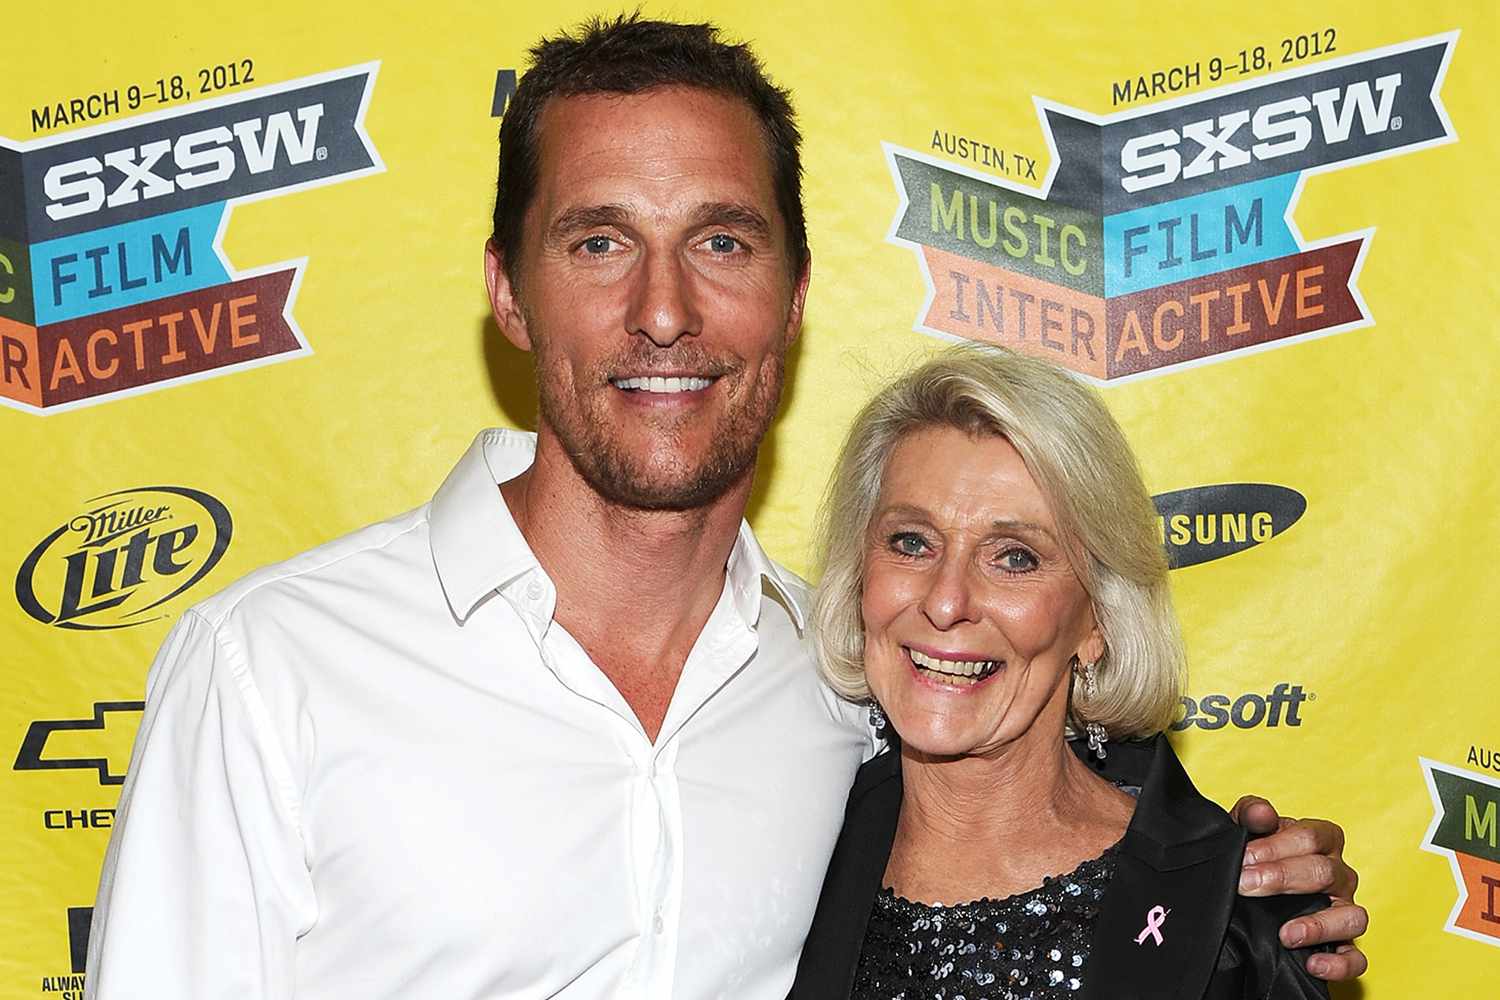 Matthew McConaughey Recalls How His Mom Would Make Him 'Get Back in Bed' for Coming to Breakfast with a Bad Attitude